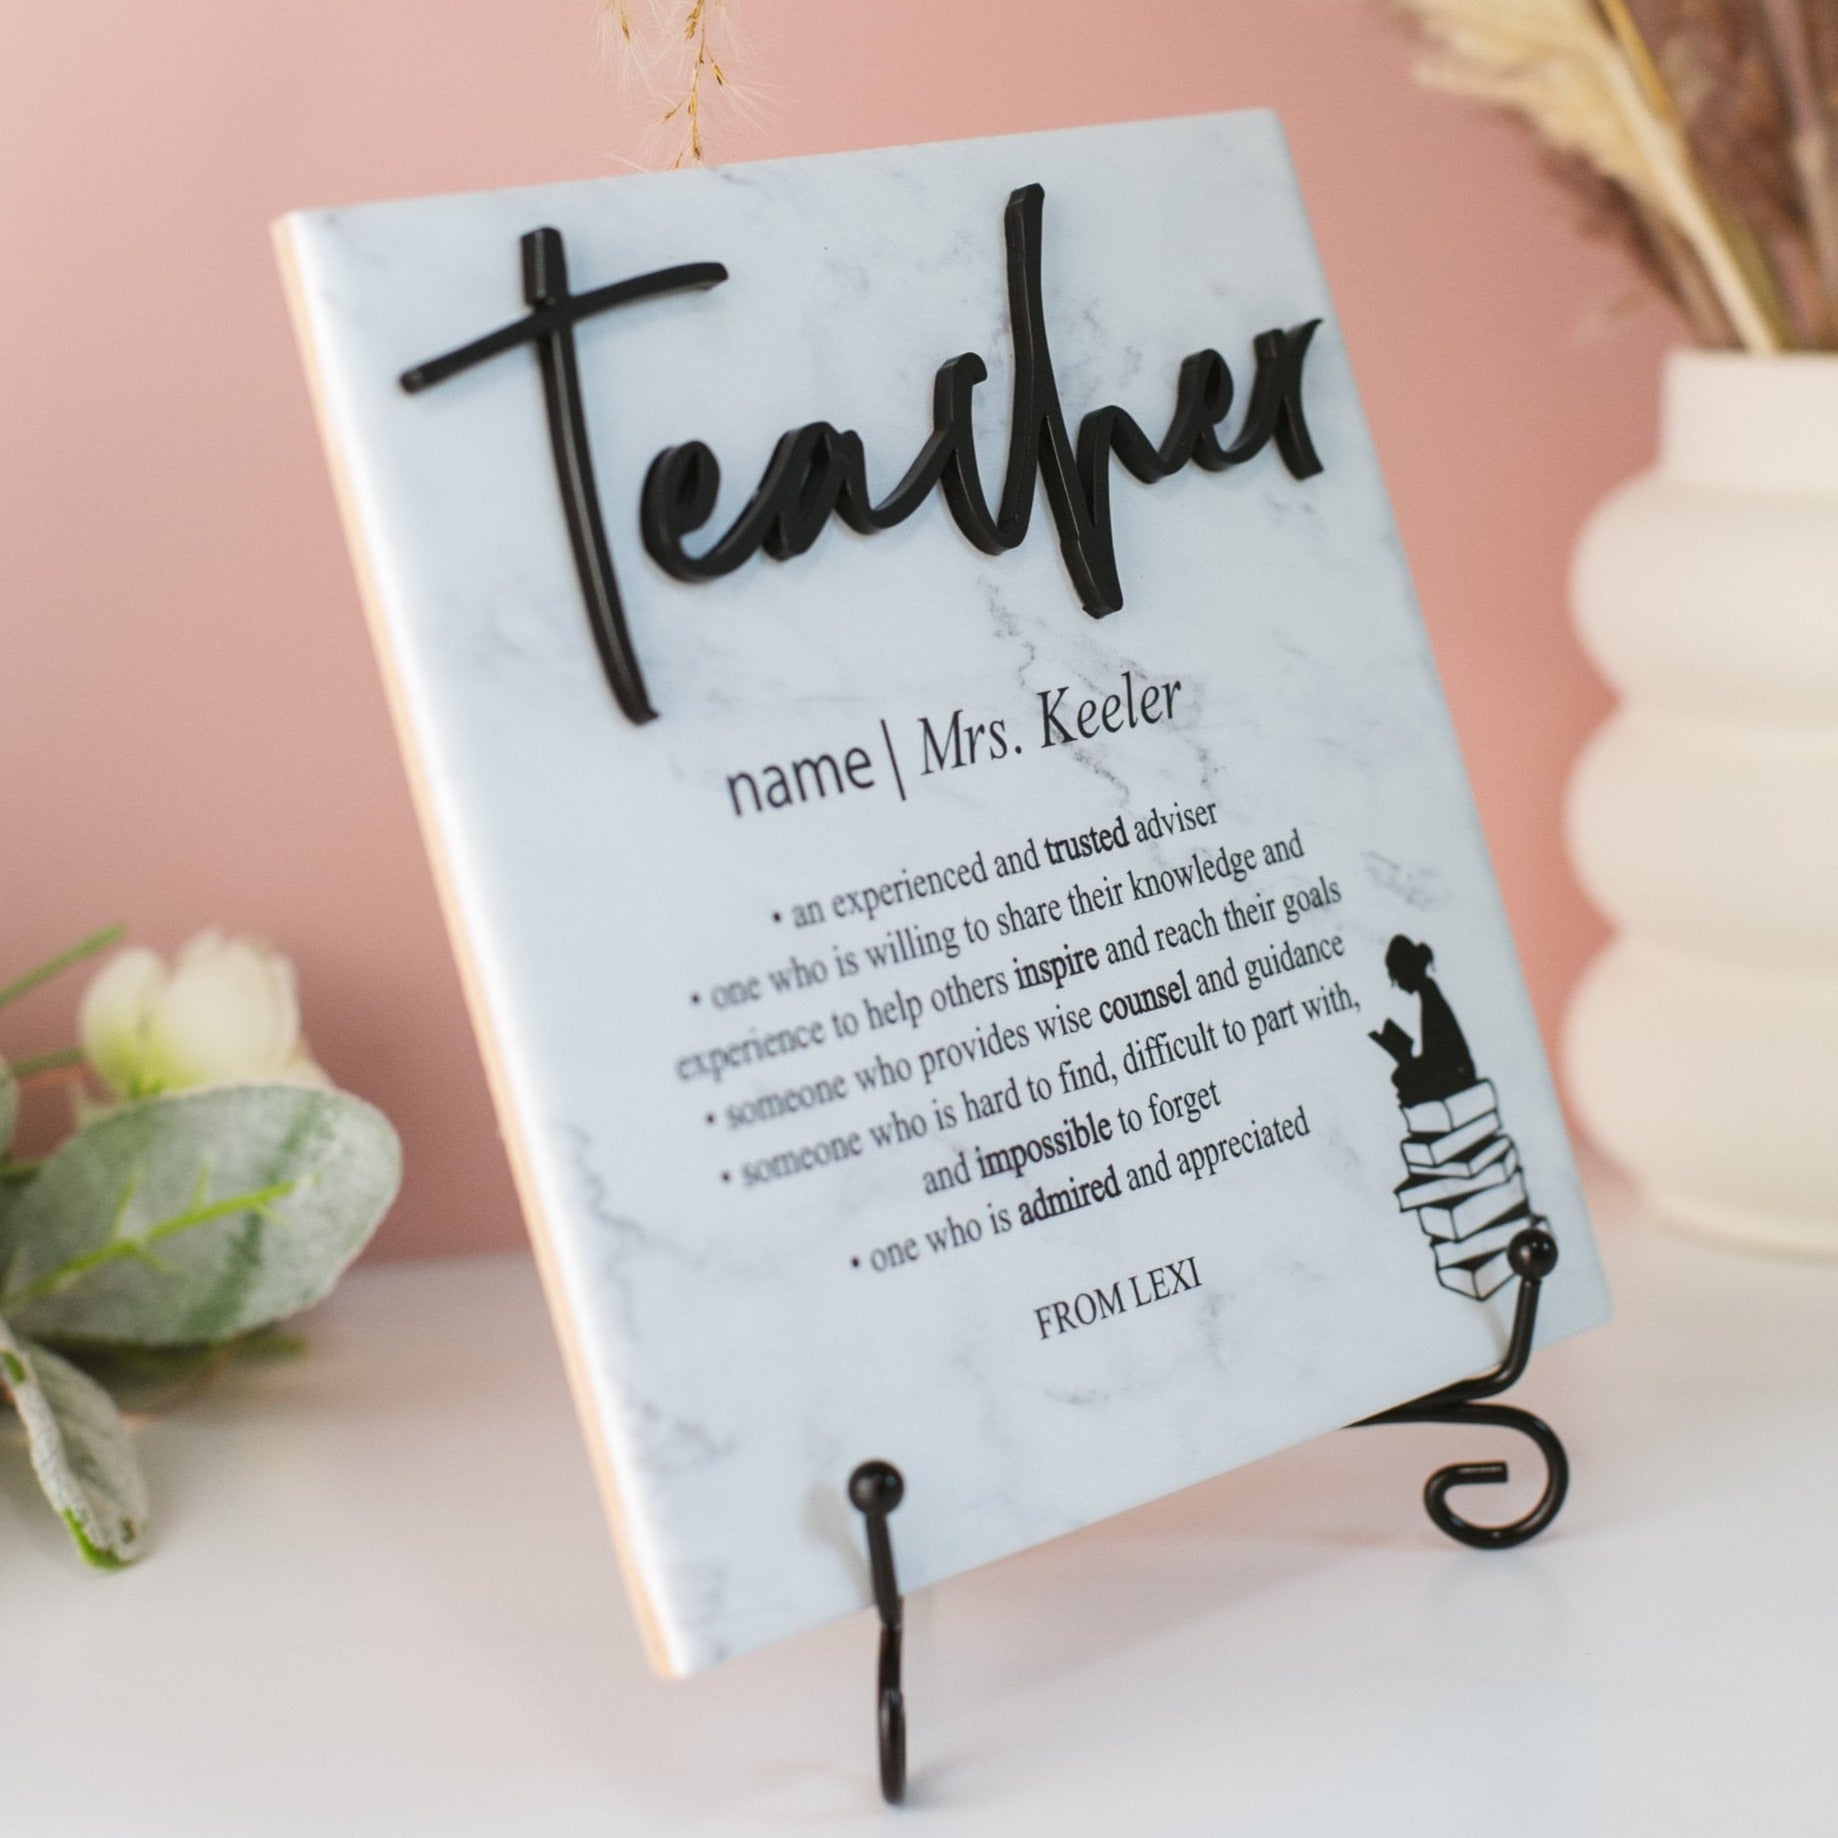 3D Reading Teacher Appreciation Tile Plaque Gift From College, High School Student or Child to Professor, Elementary Teacher, Mentor